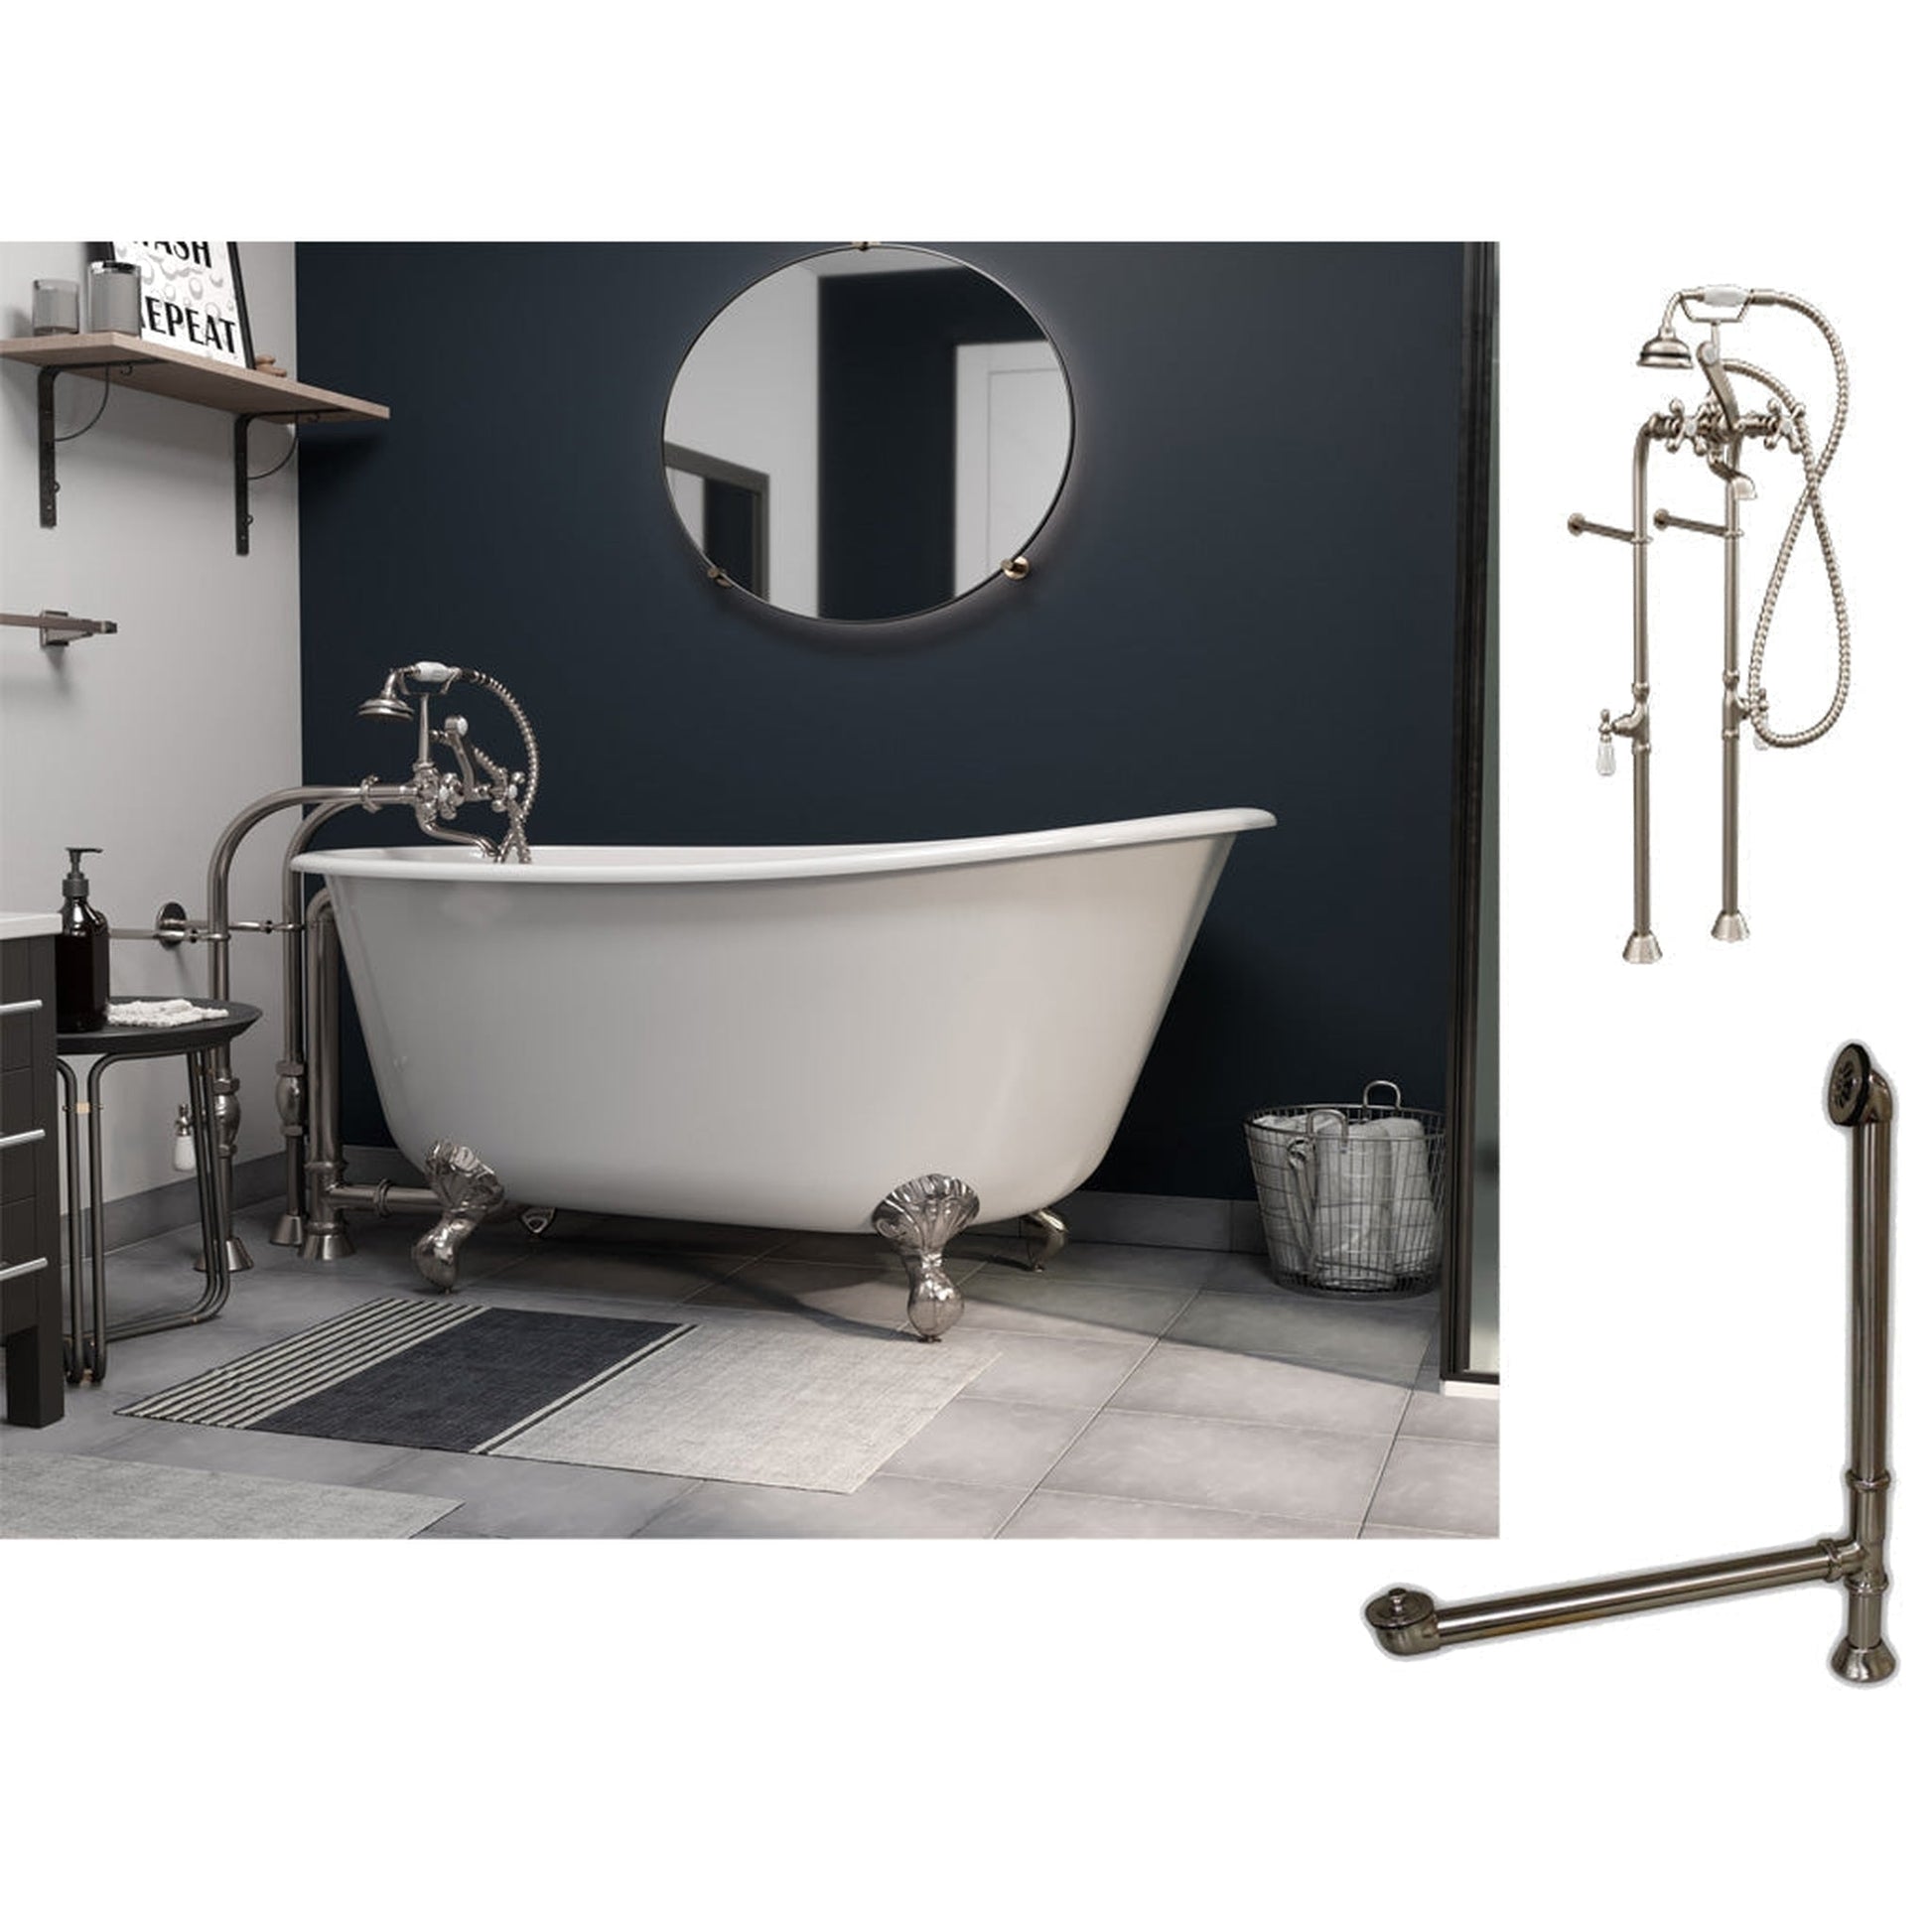 Cambridge Plumbing 58" White Cast Iron Swedish Single Slipper Clawfoot Bathtub With No Deck Holes And Complete Plumbing Package Including Modern Floor Mounted British Telephone Faucet, Drain And Overflow Assembly In Brushed Nickel